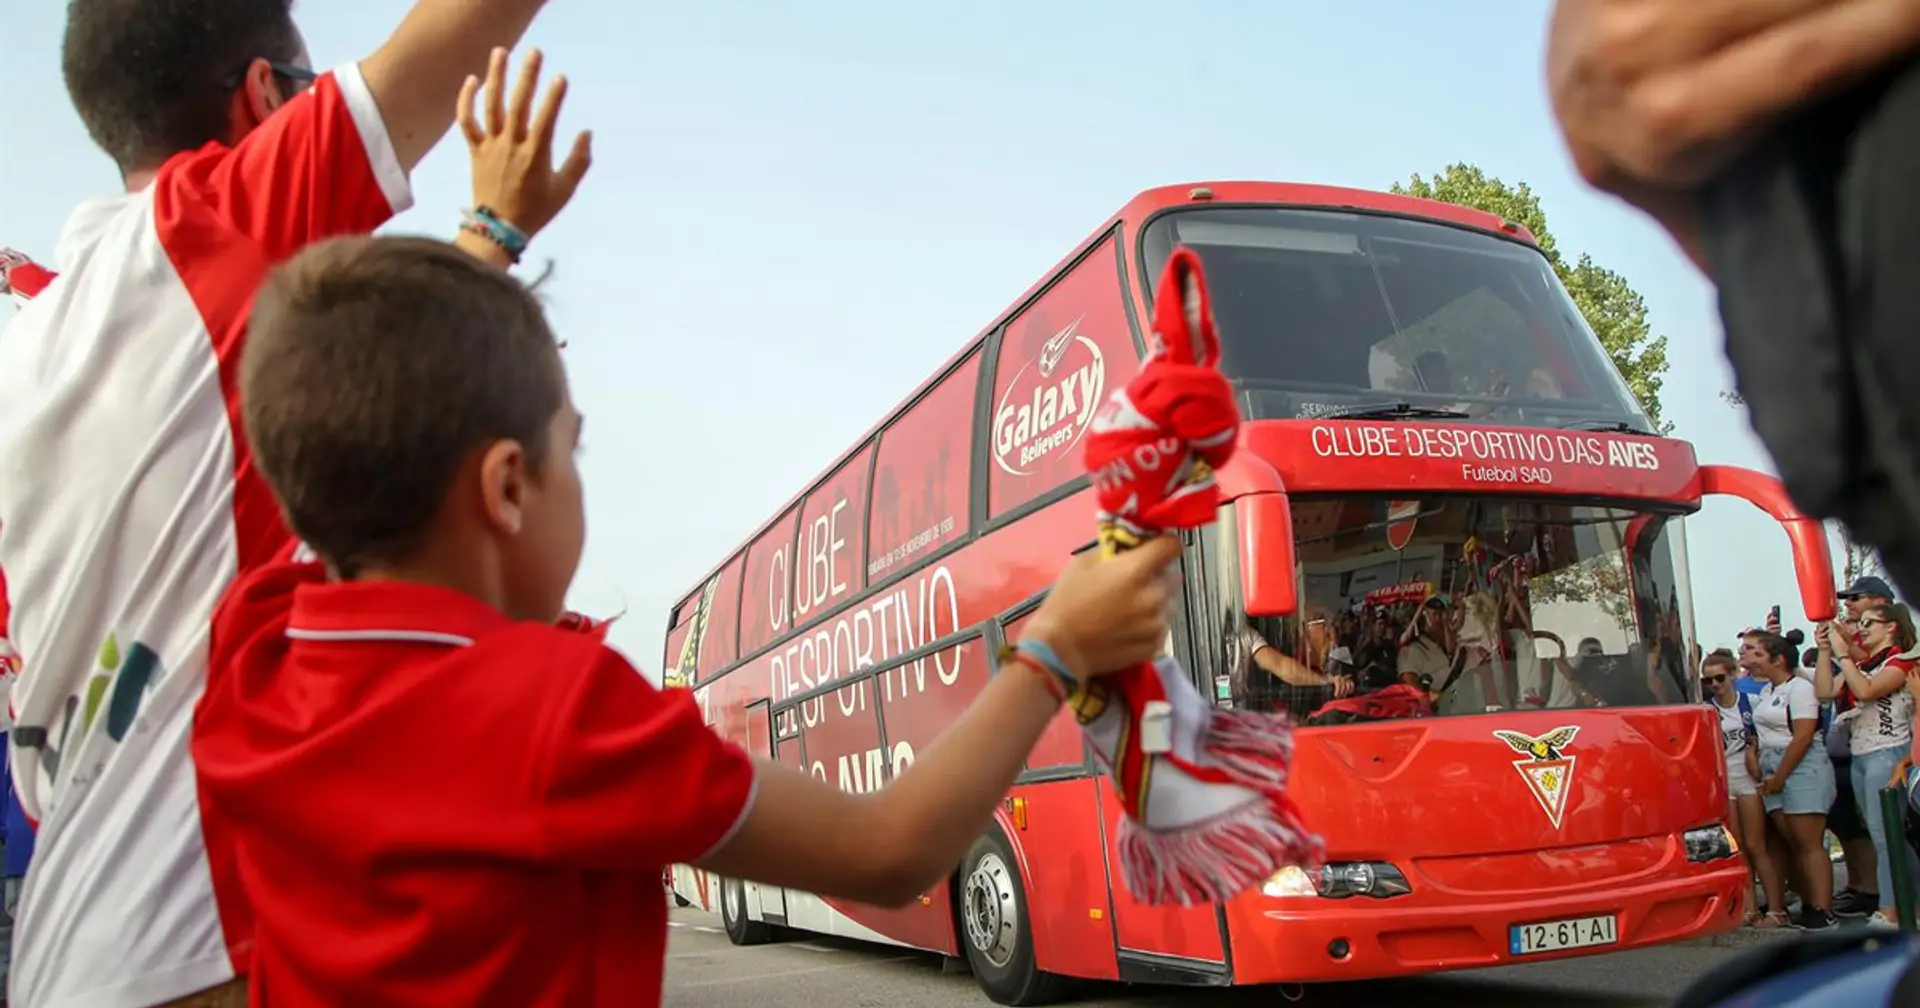 Portuguese side Aves have to travel for Benfica game in their own cars after keys to team bus disappear